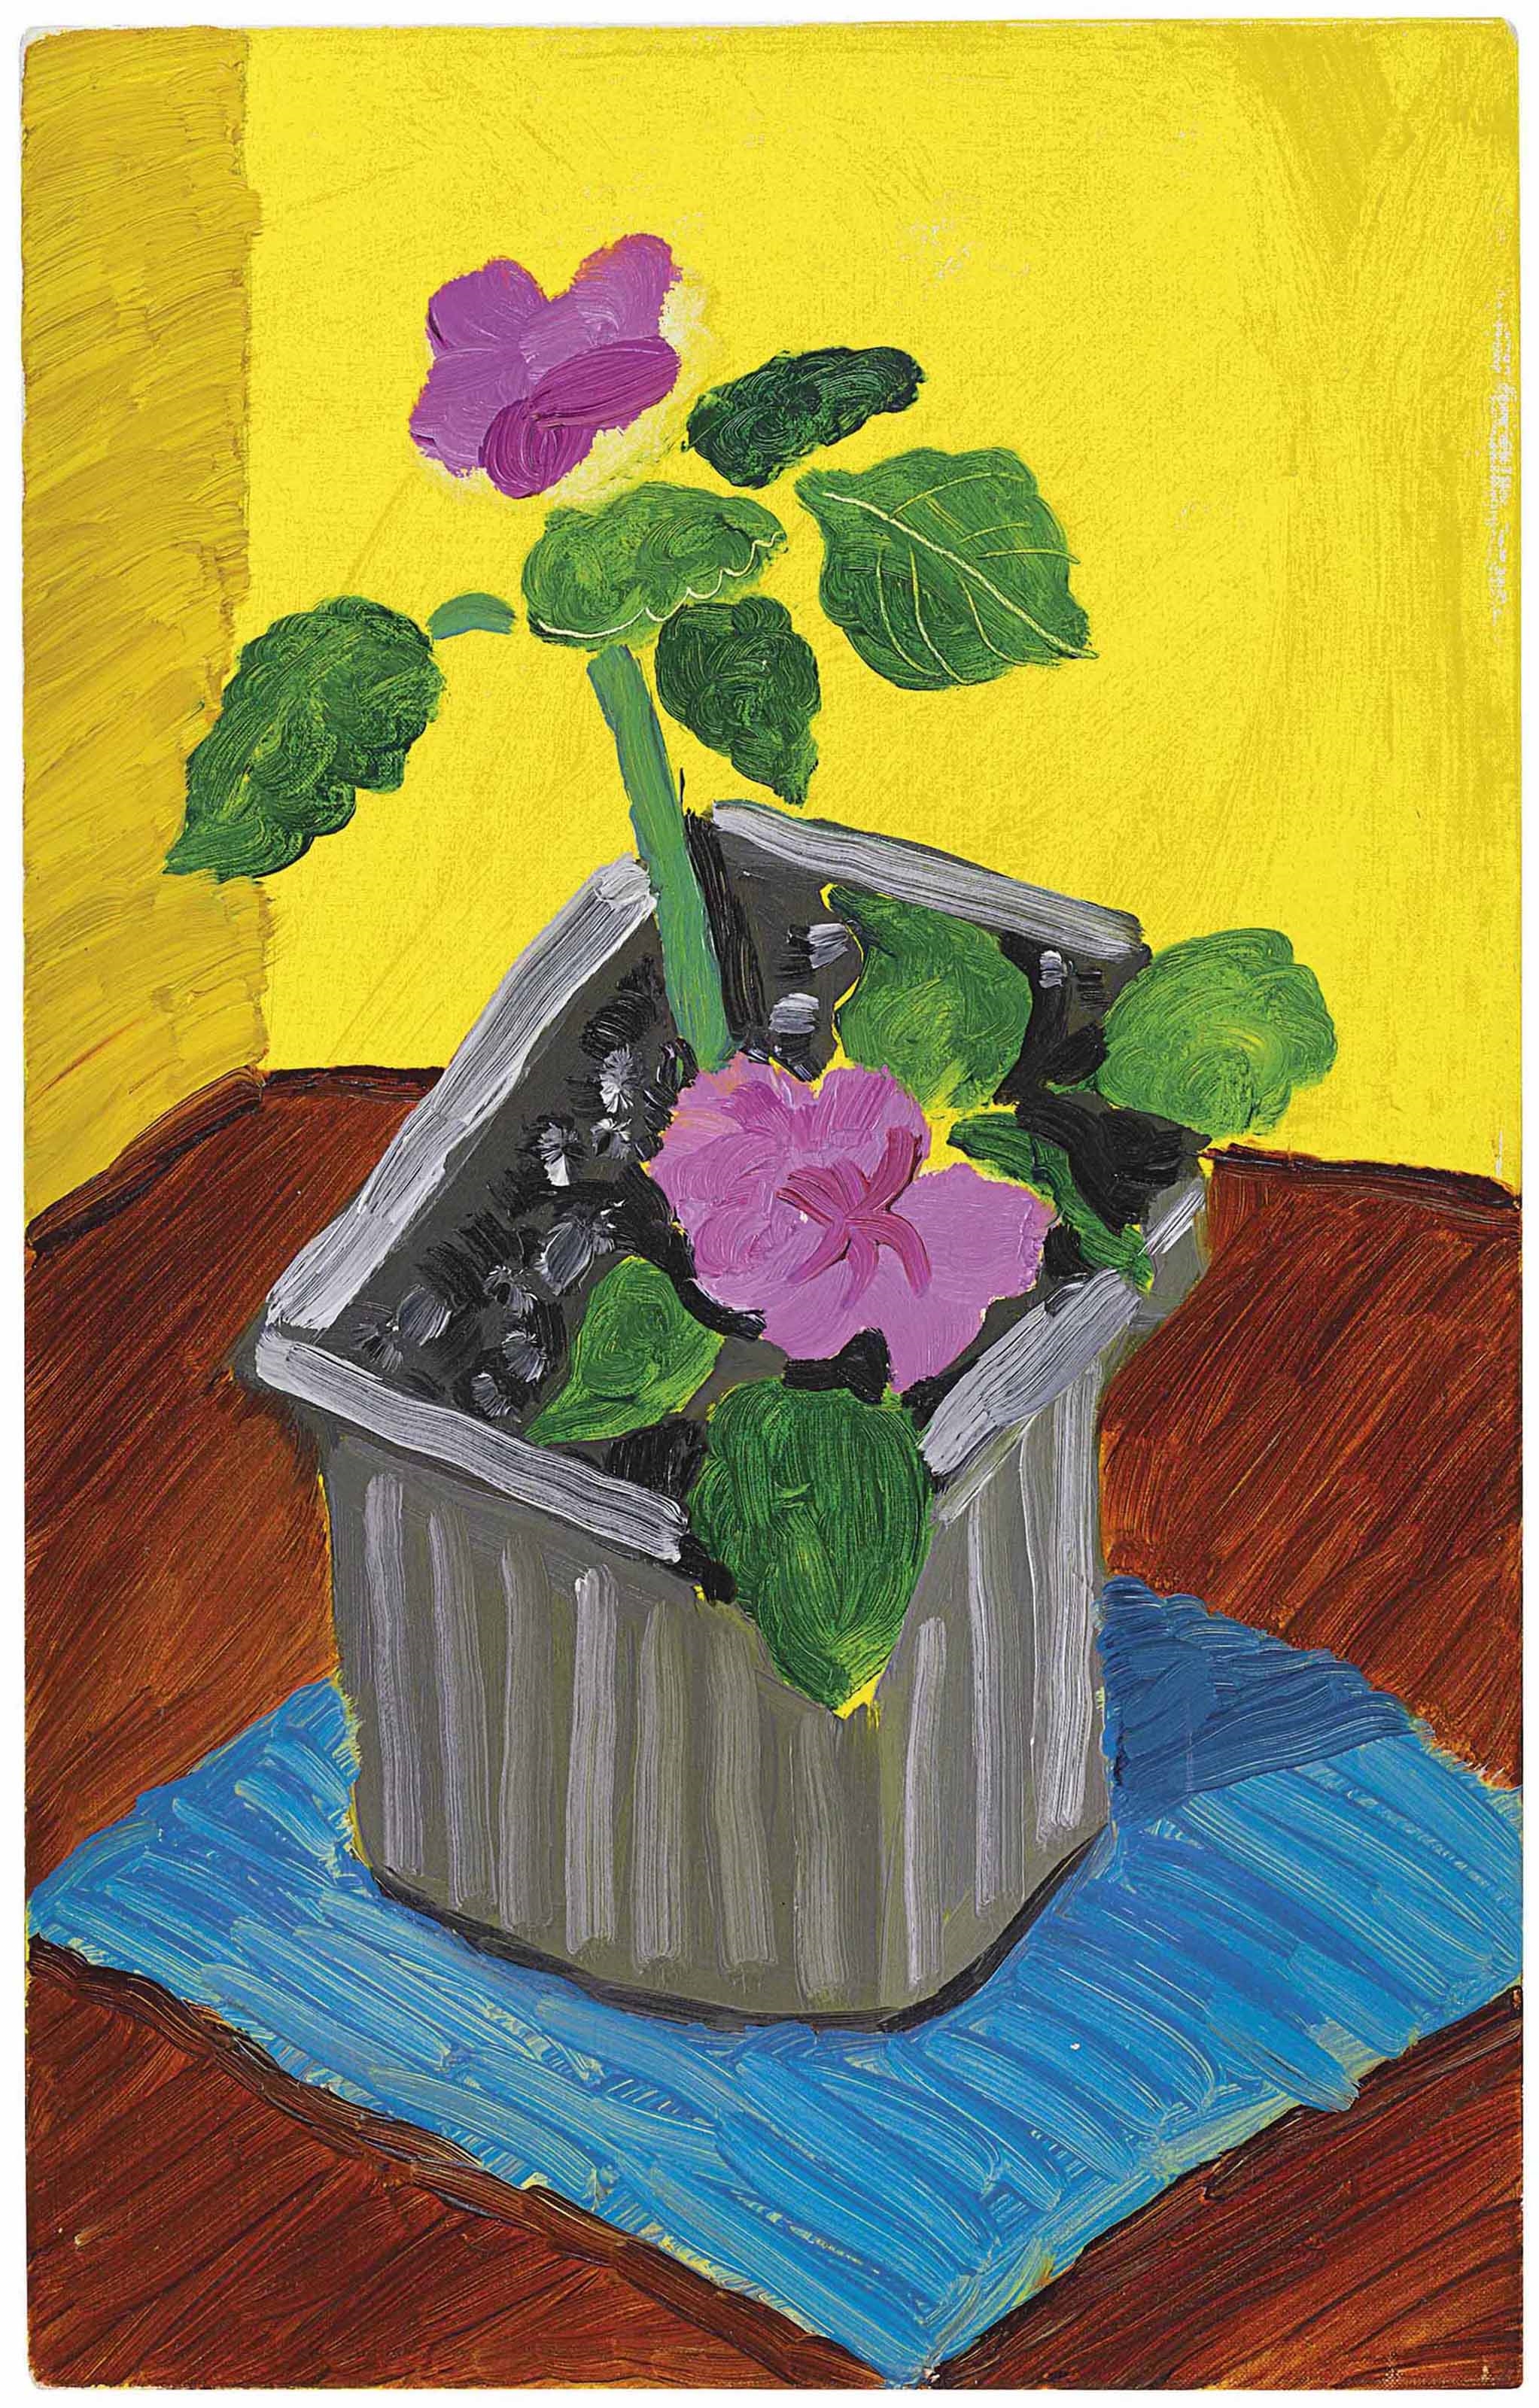 Two Pink Flowers by David Hockney, 1989